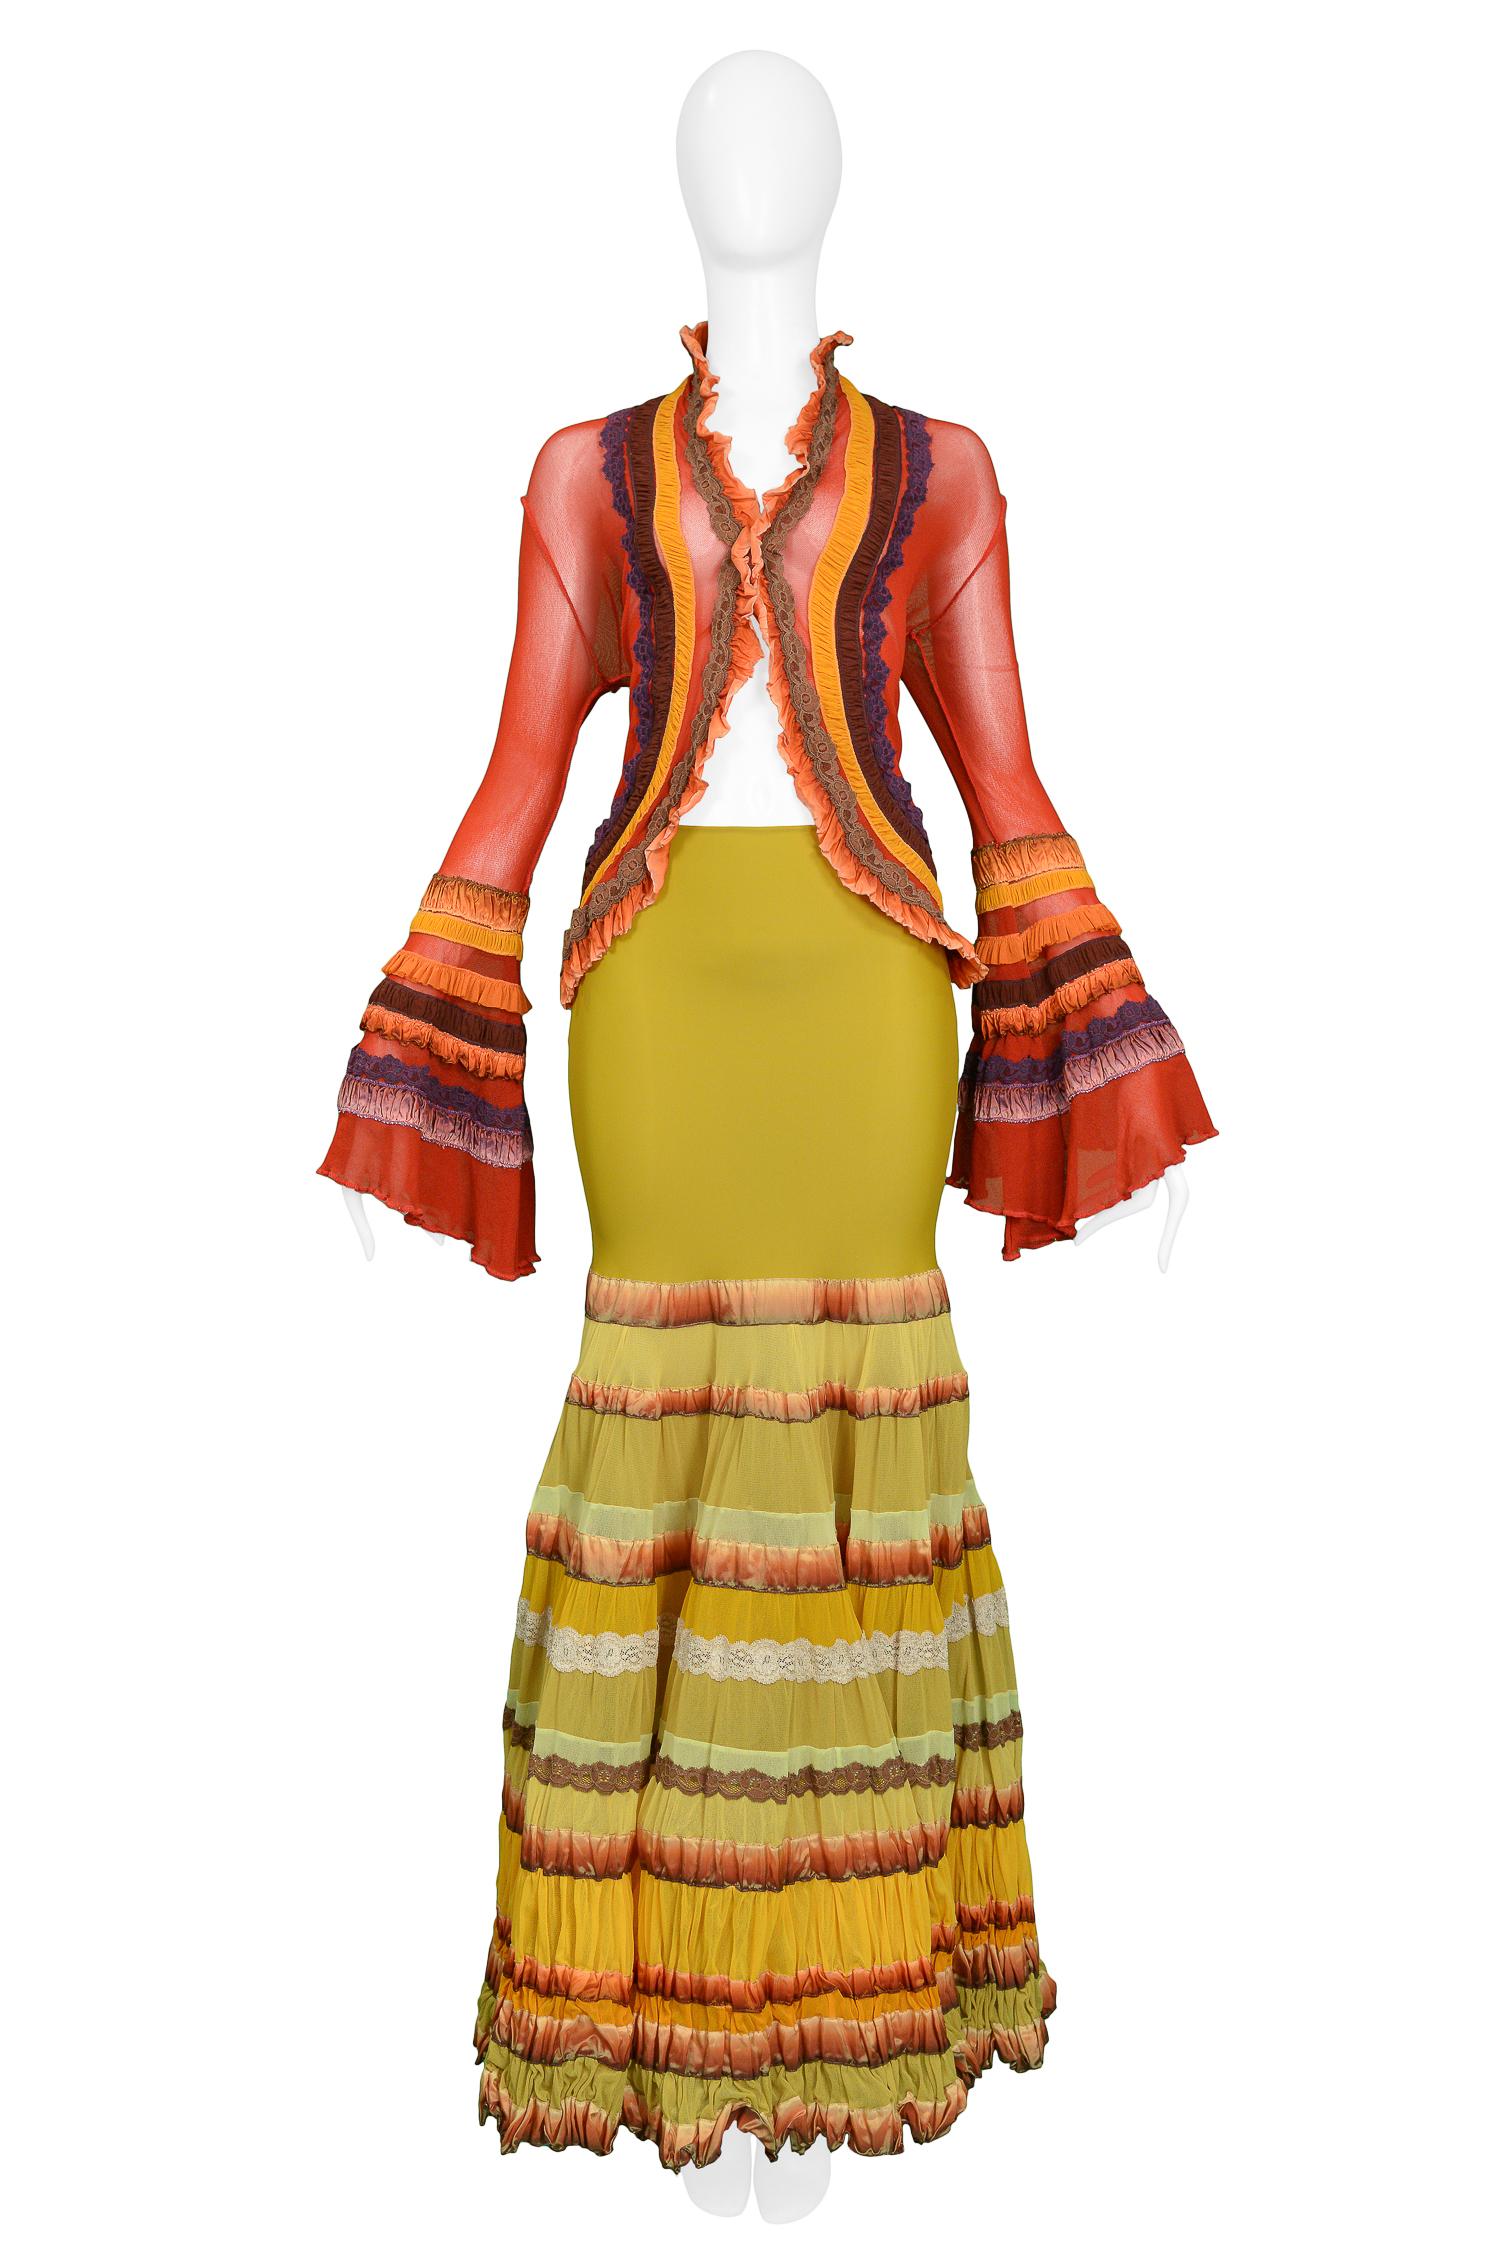 Vintage Jean Paul Gaultier multi-color 'Frida' ensemble. The ensemble features a chartreuse silk jersey mermaid skirt with colorful interchanging fabrics such as lace, mesh & ribbon. The matching red blouse is also adorned with multi-fabric insets,